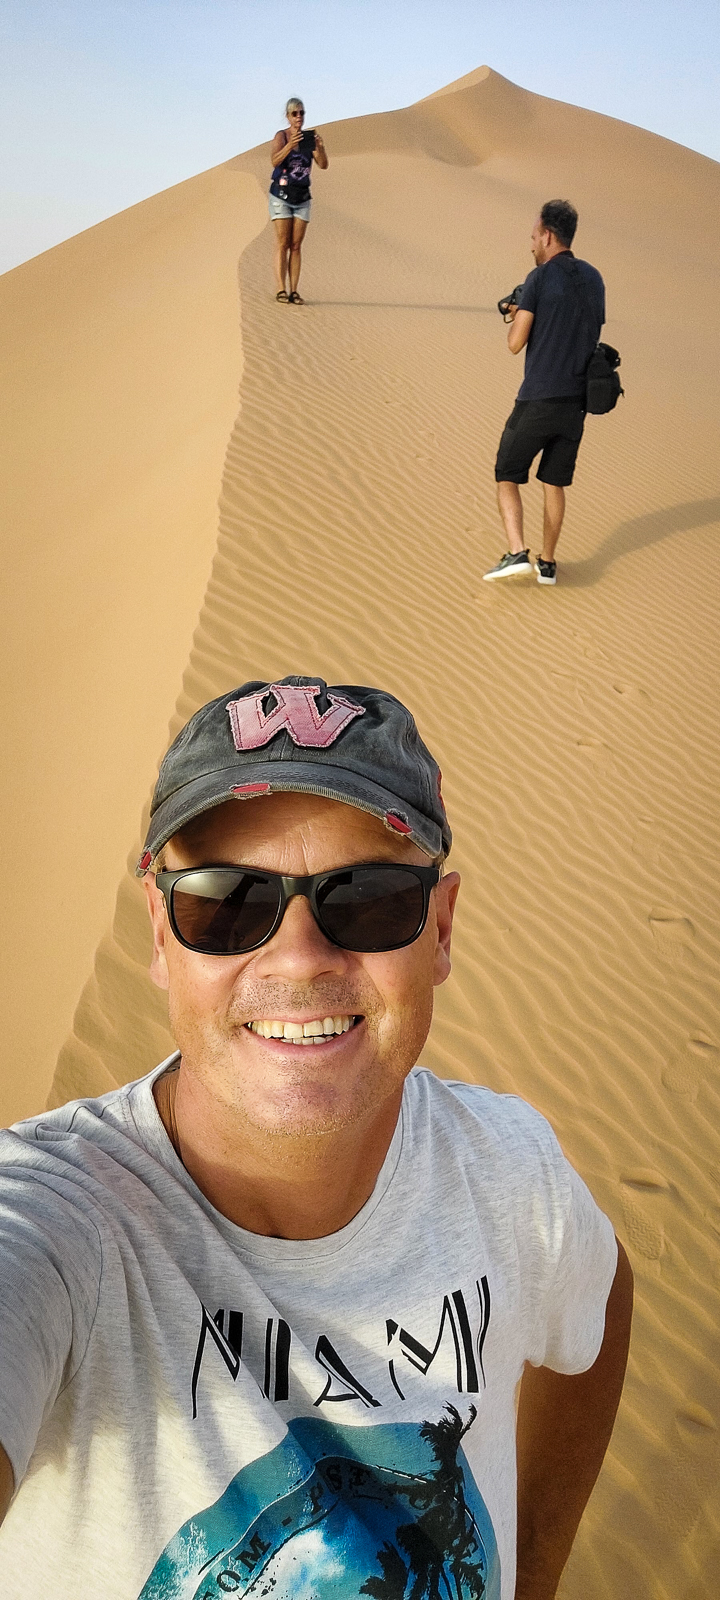 <span  class="uc_style_uc_tiles_grid_image_elementor_uc_items_attribute_title" style="color:#ffffff;">dunes</span>